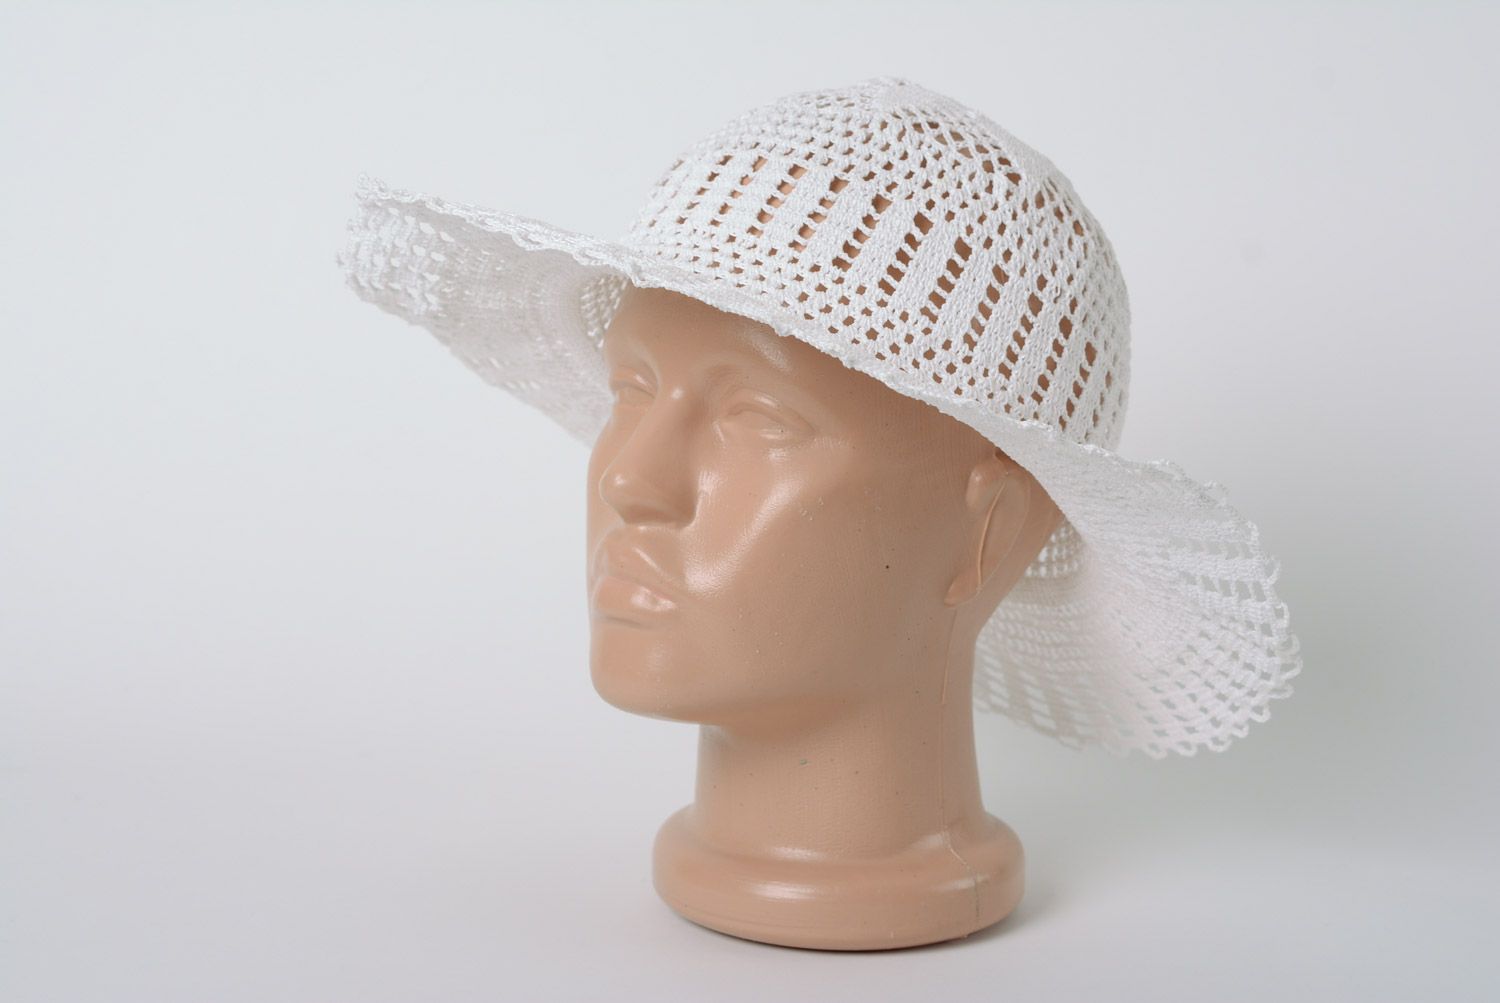 Beautiful handmade white lacy summer hat crocheted of cotton threads for women photo 1